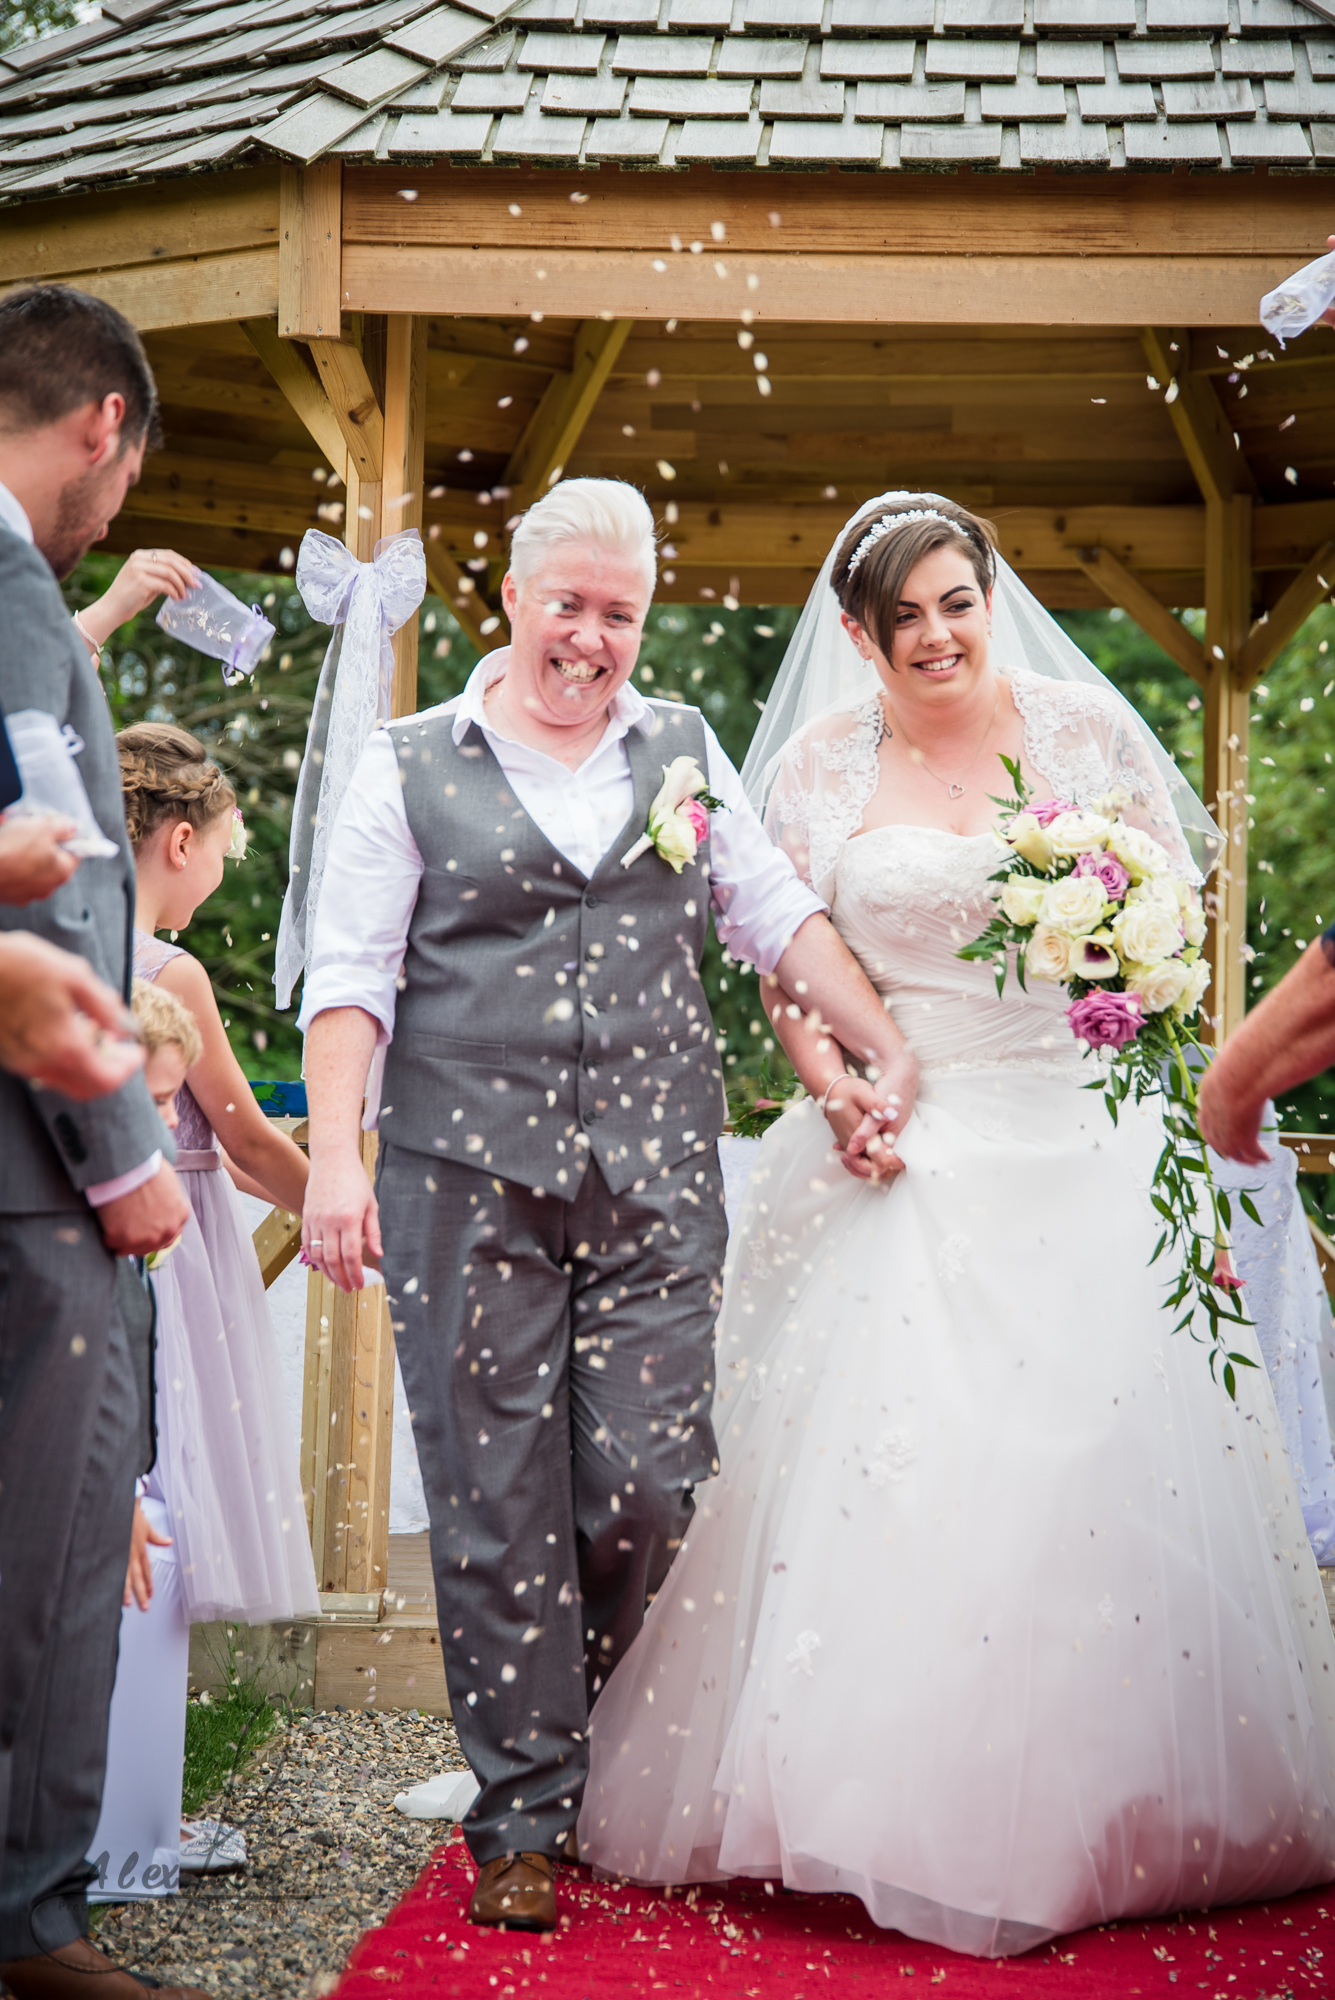 the Shropshire bride and bride walk down the aisle together getting covered in confetti